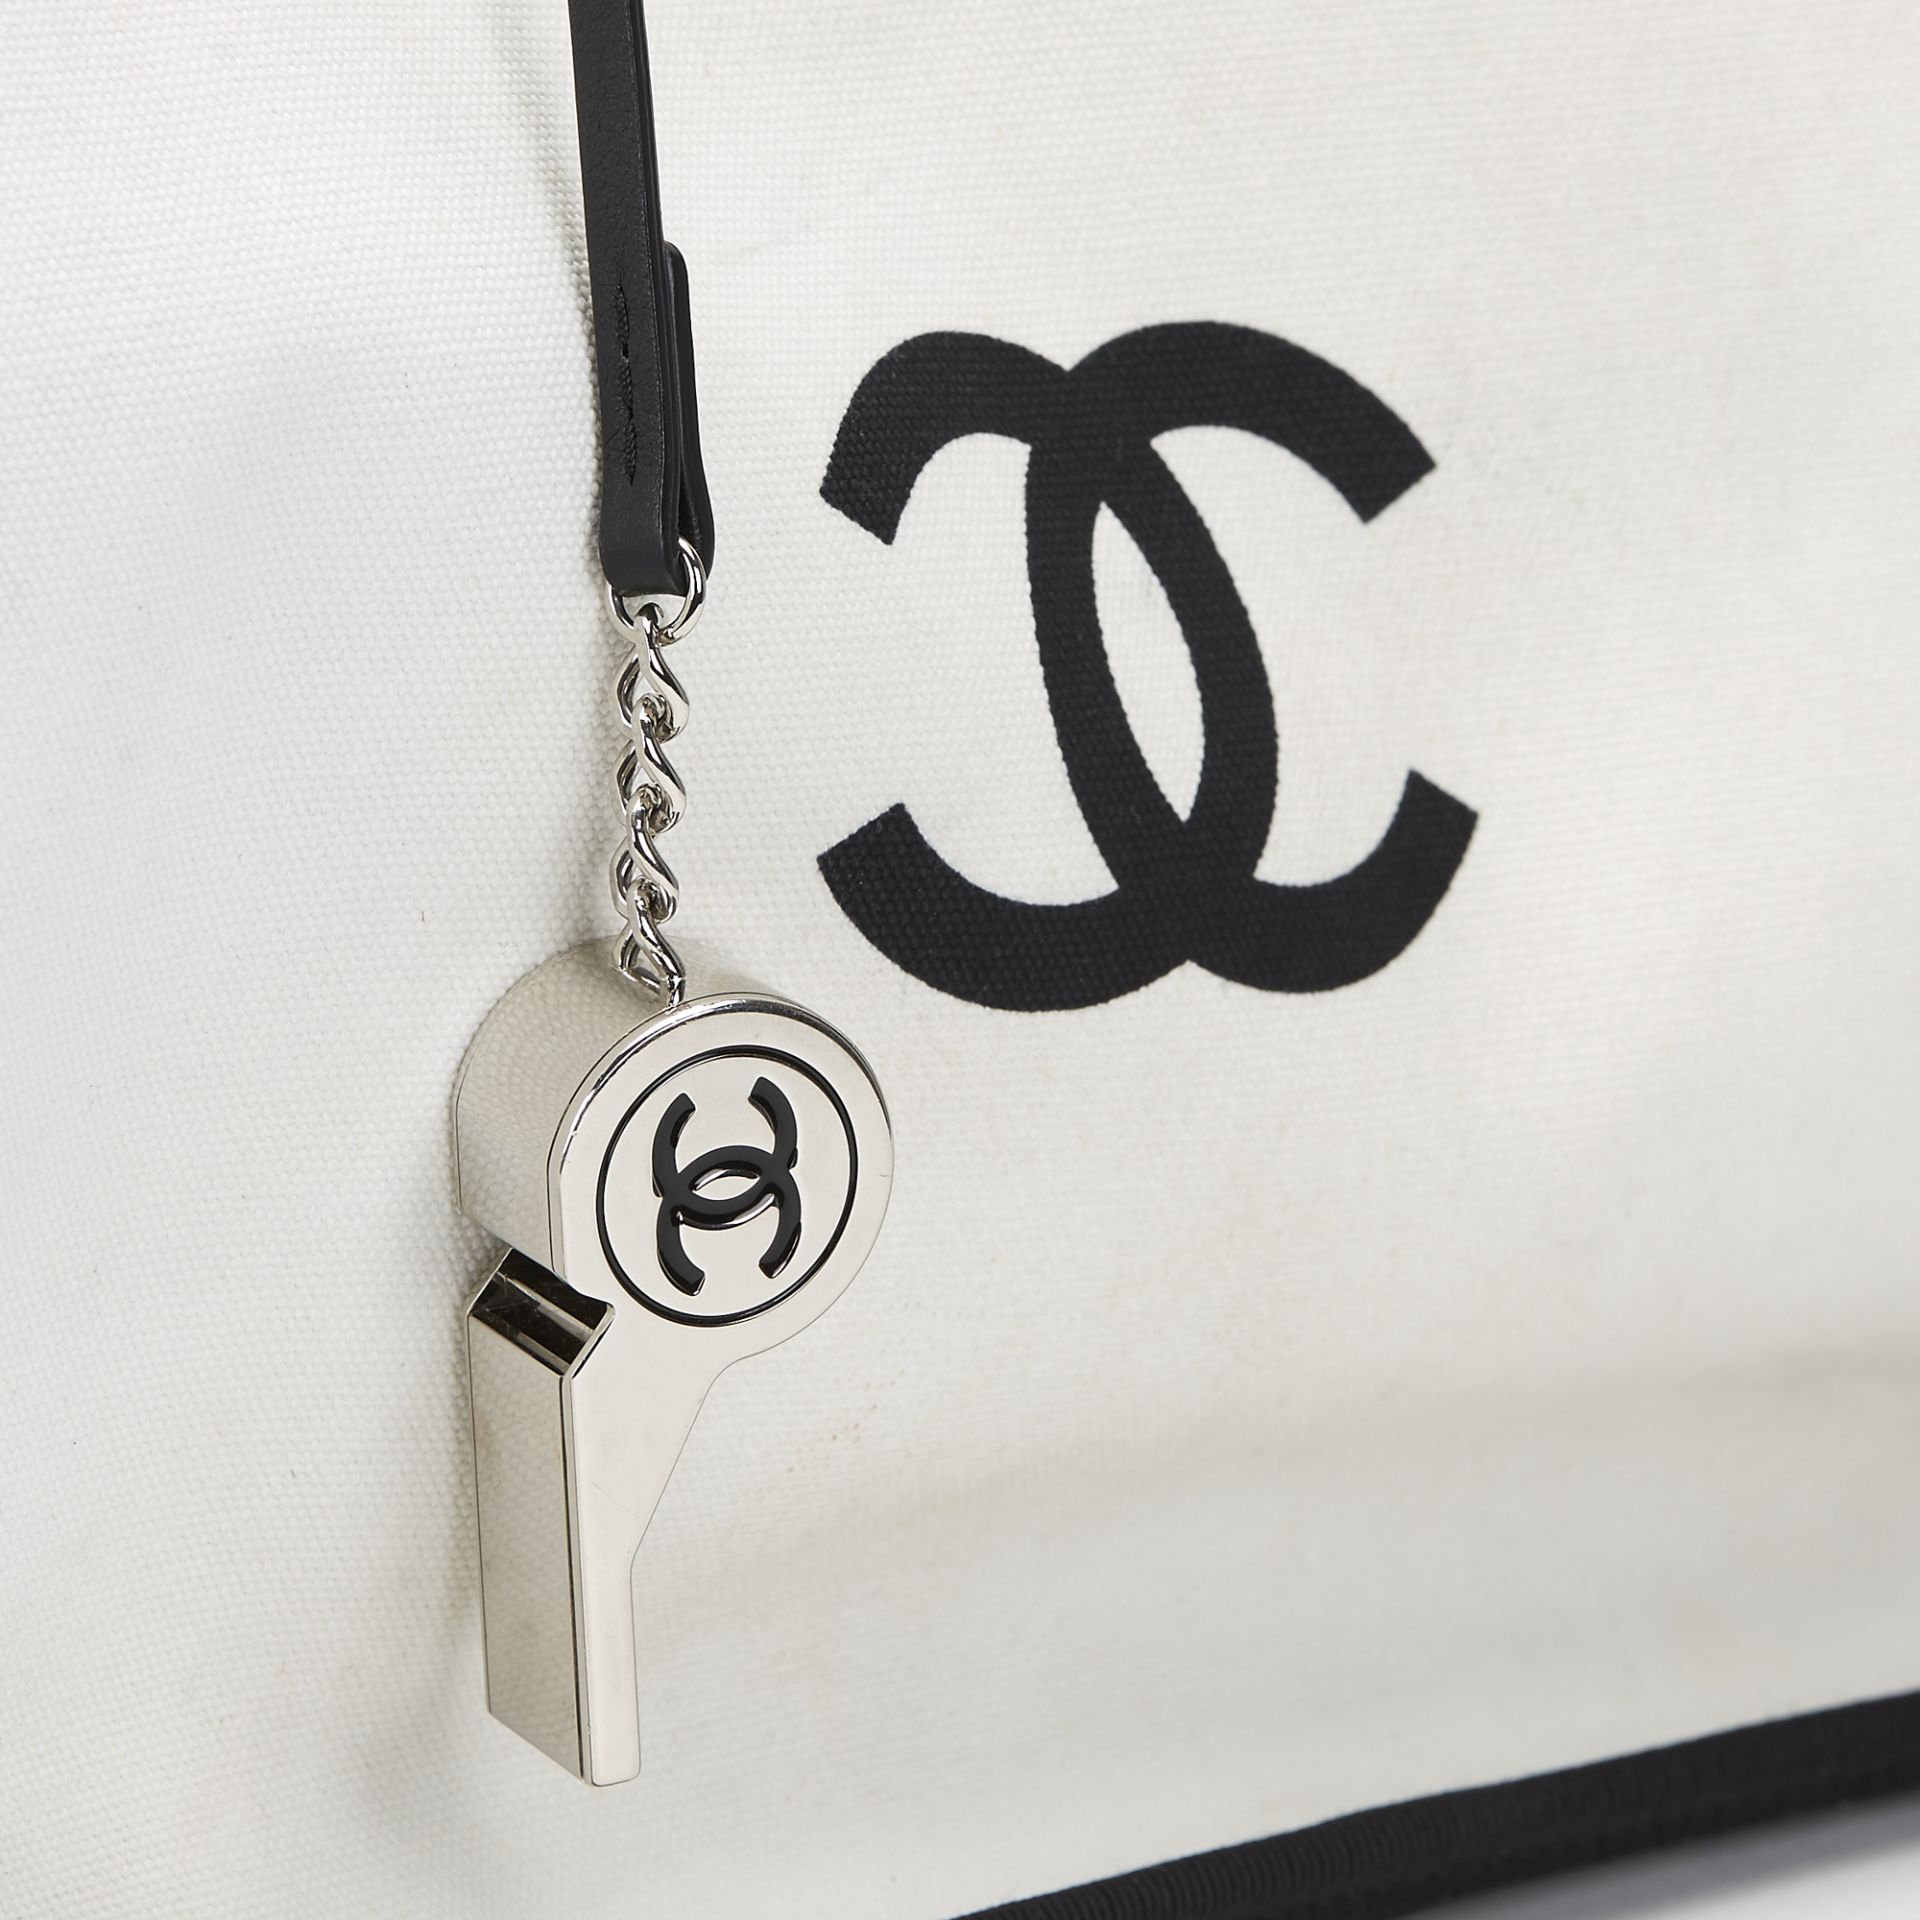 Chanel Ladies First Shopper Tote - Image 4 of 5